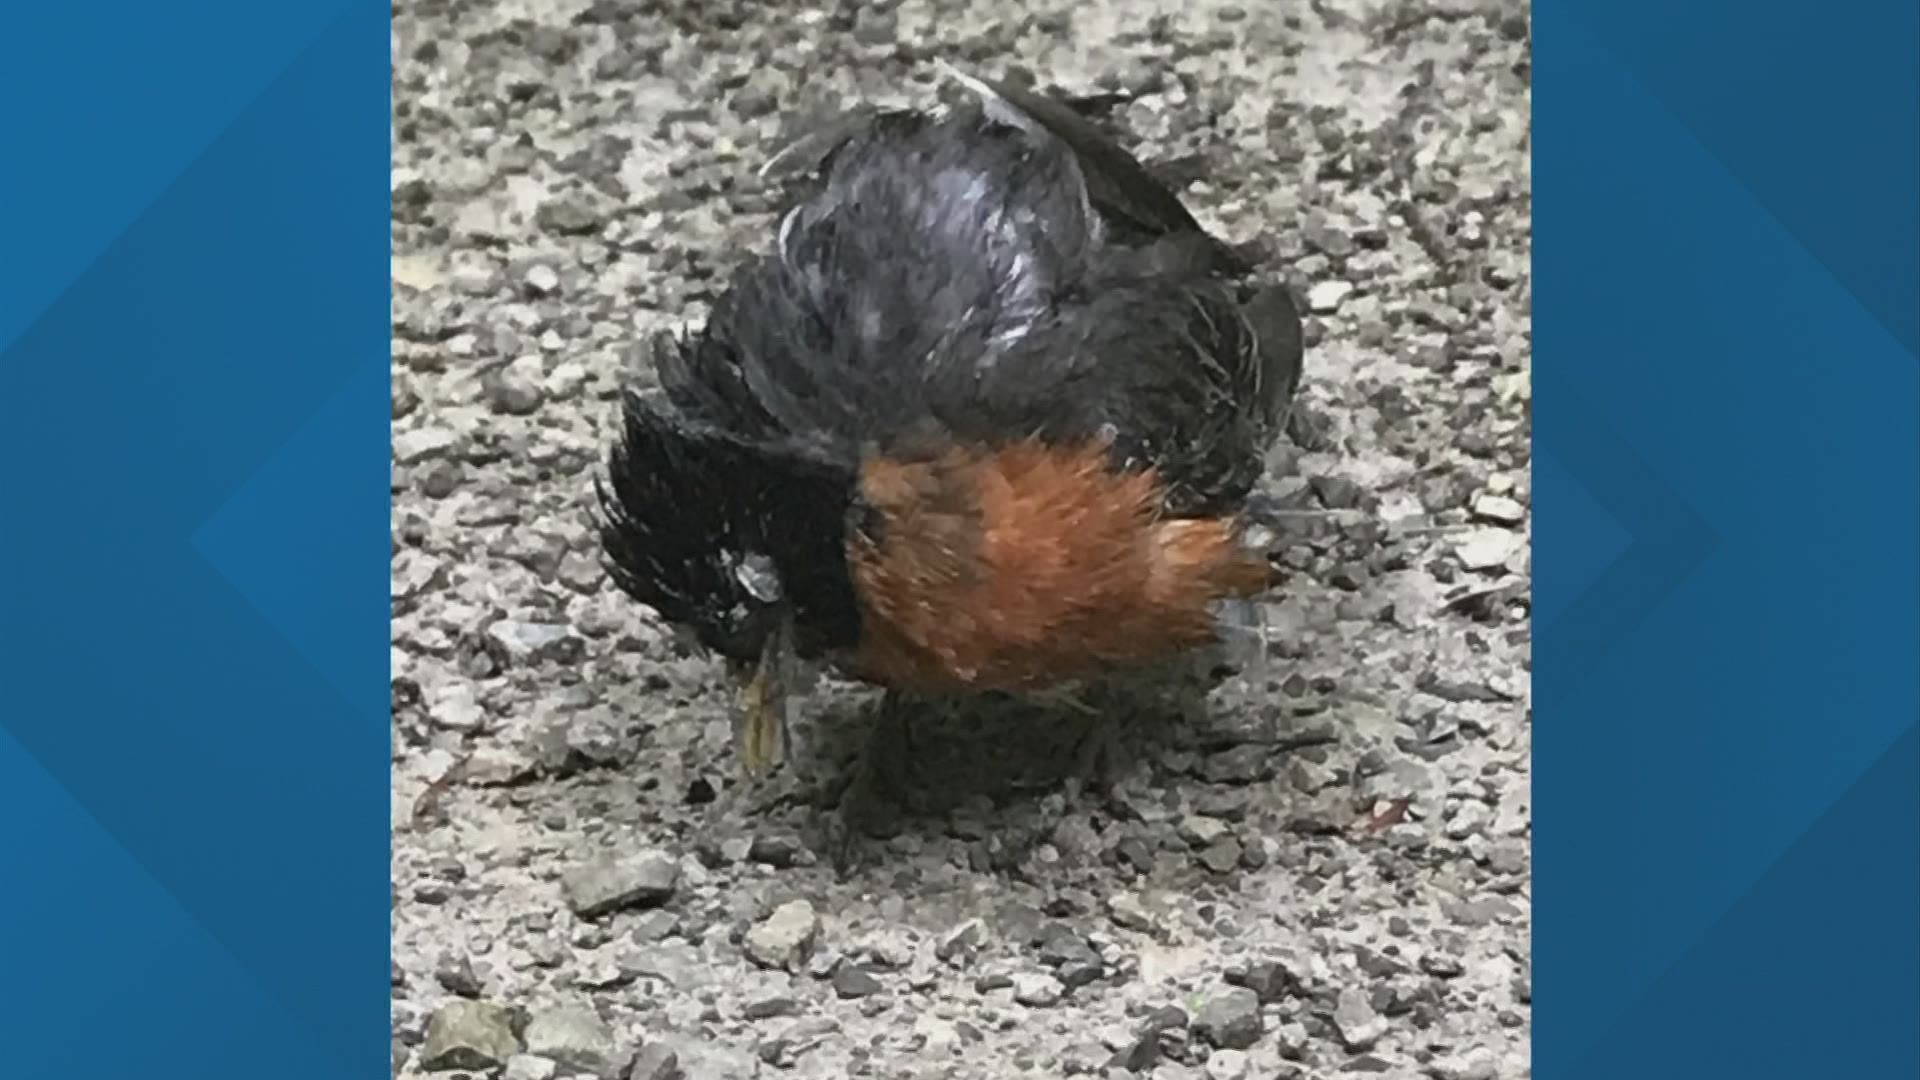 The Ohio Department of Natural Resources Division of Wildlife has received several calls about dead birds being found over Ohio and nearby states.